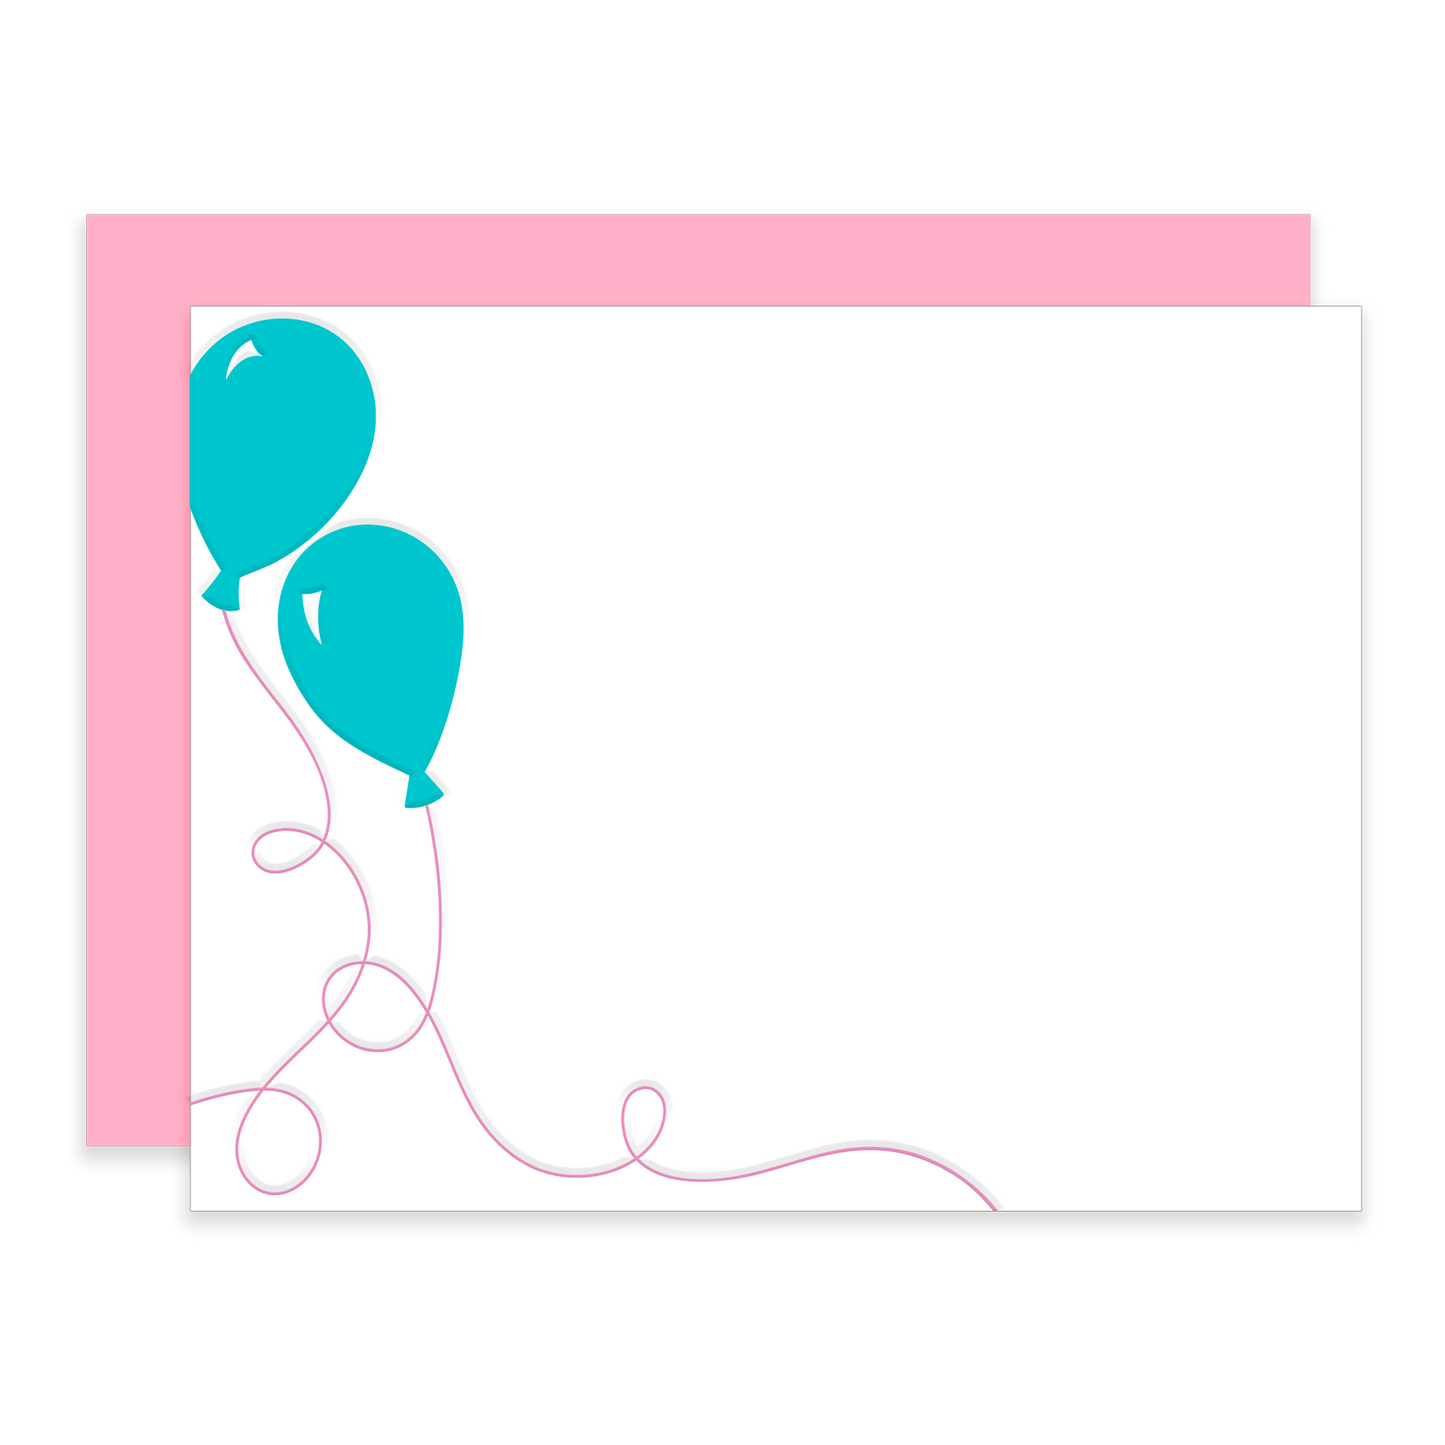 Image of a Notecard with blue balloons with purple string and a pink envelope.